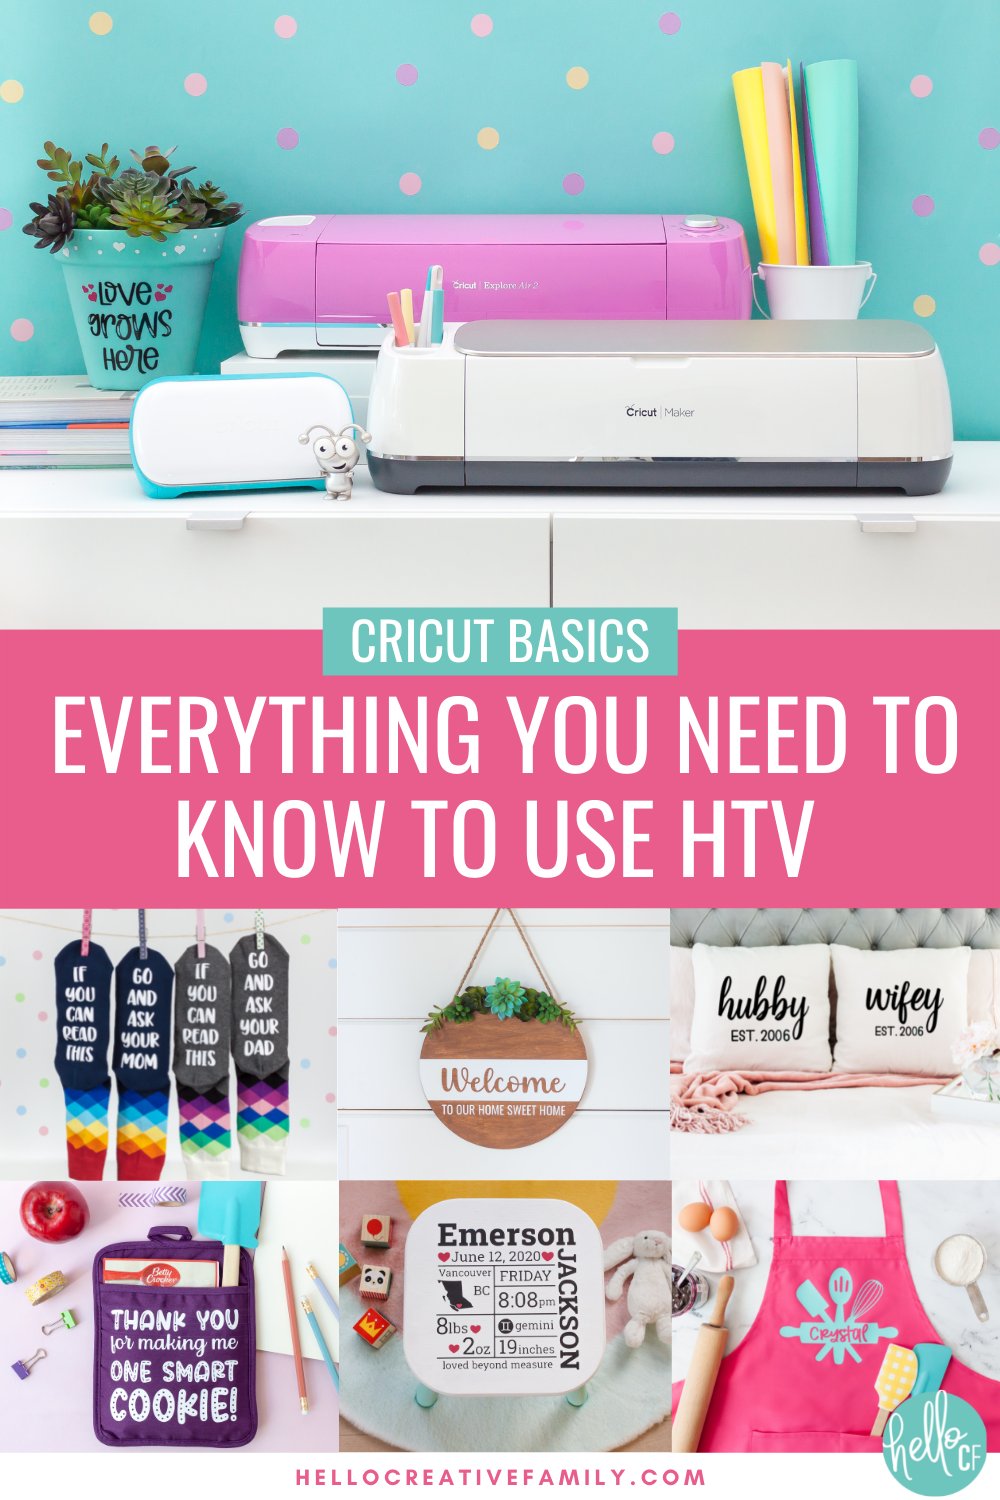 Wondering "What is HTV vinyl"? Learn about heat transfer vinyl and why HTV is great for customizing shirts, onesies, wood signs, tote bags and more with your Cricut Joy, Cricut Explore Air or Cricut Maker! We're giving you all the info you need to know to use HTV like a pro! These tips are great for Silhouette Cameo users too!